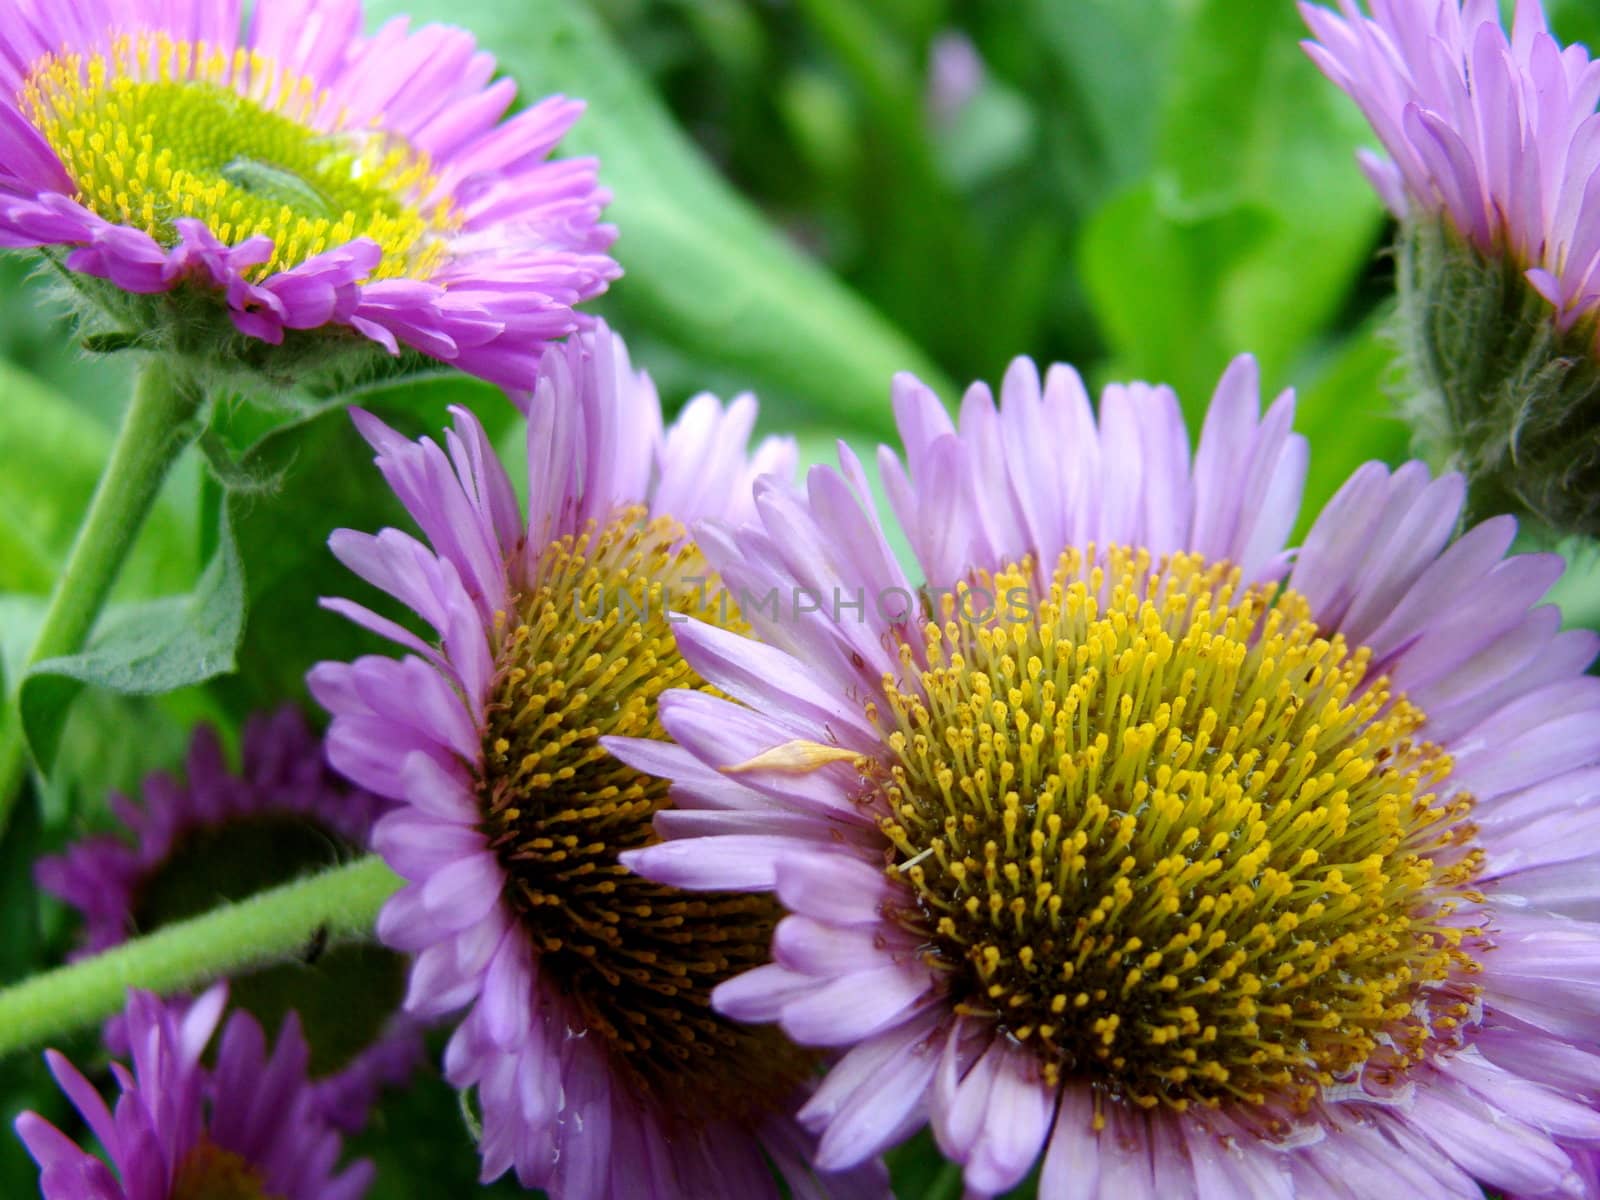 close up of misty purple daisies